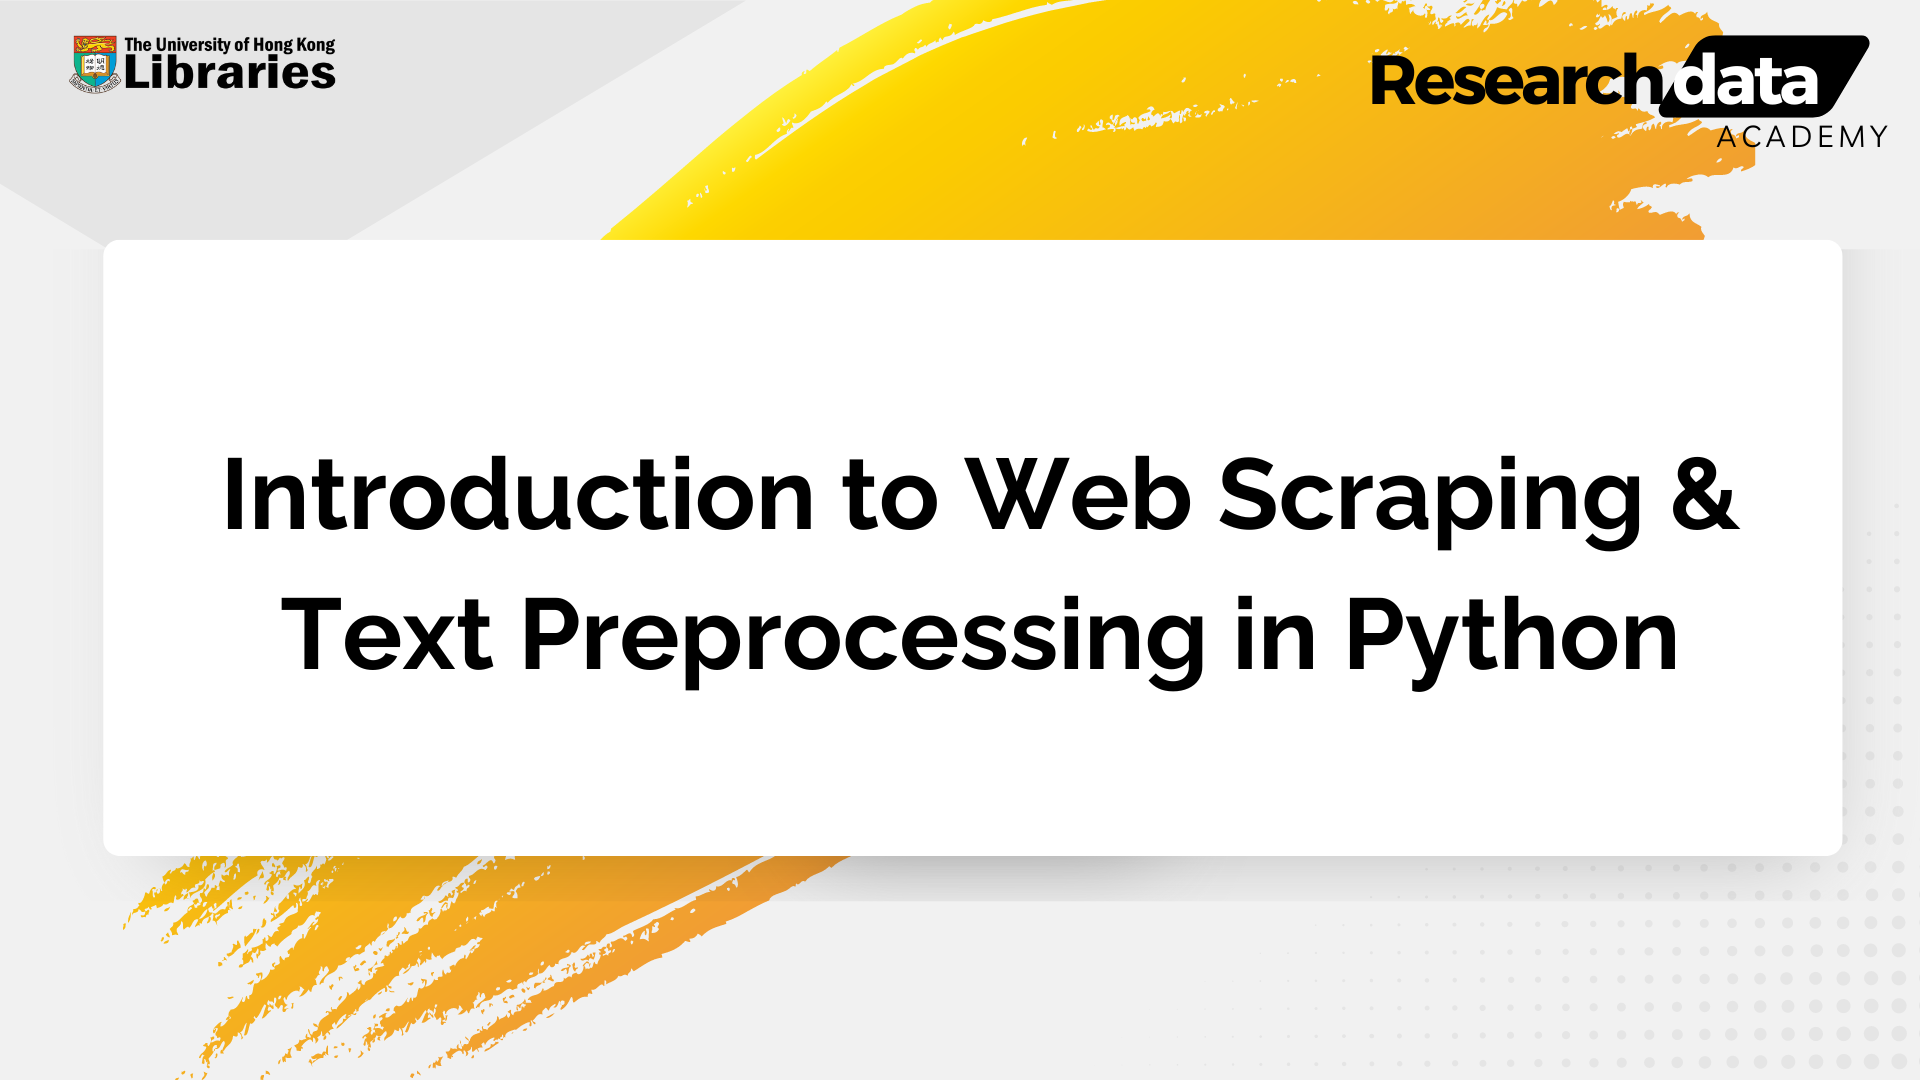 Introduction to Web Scraping & Text Preprocessing in Python